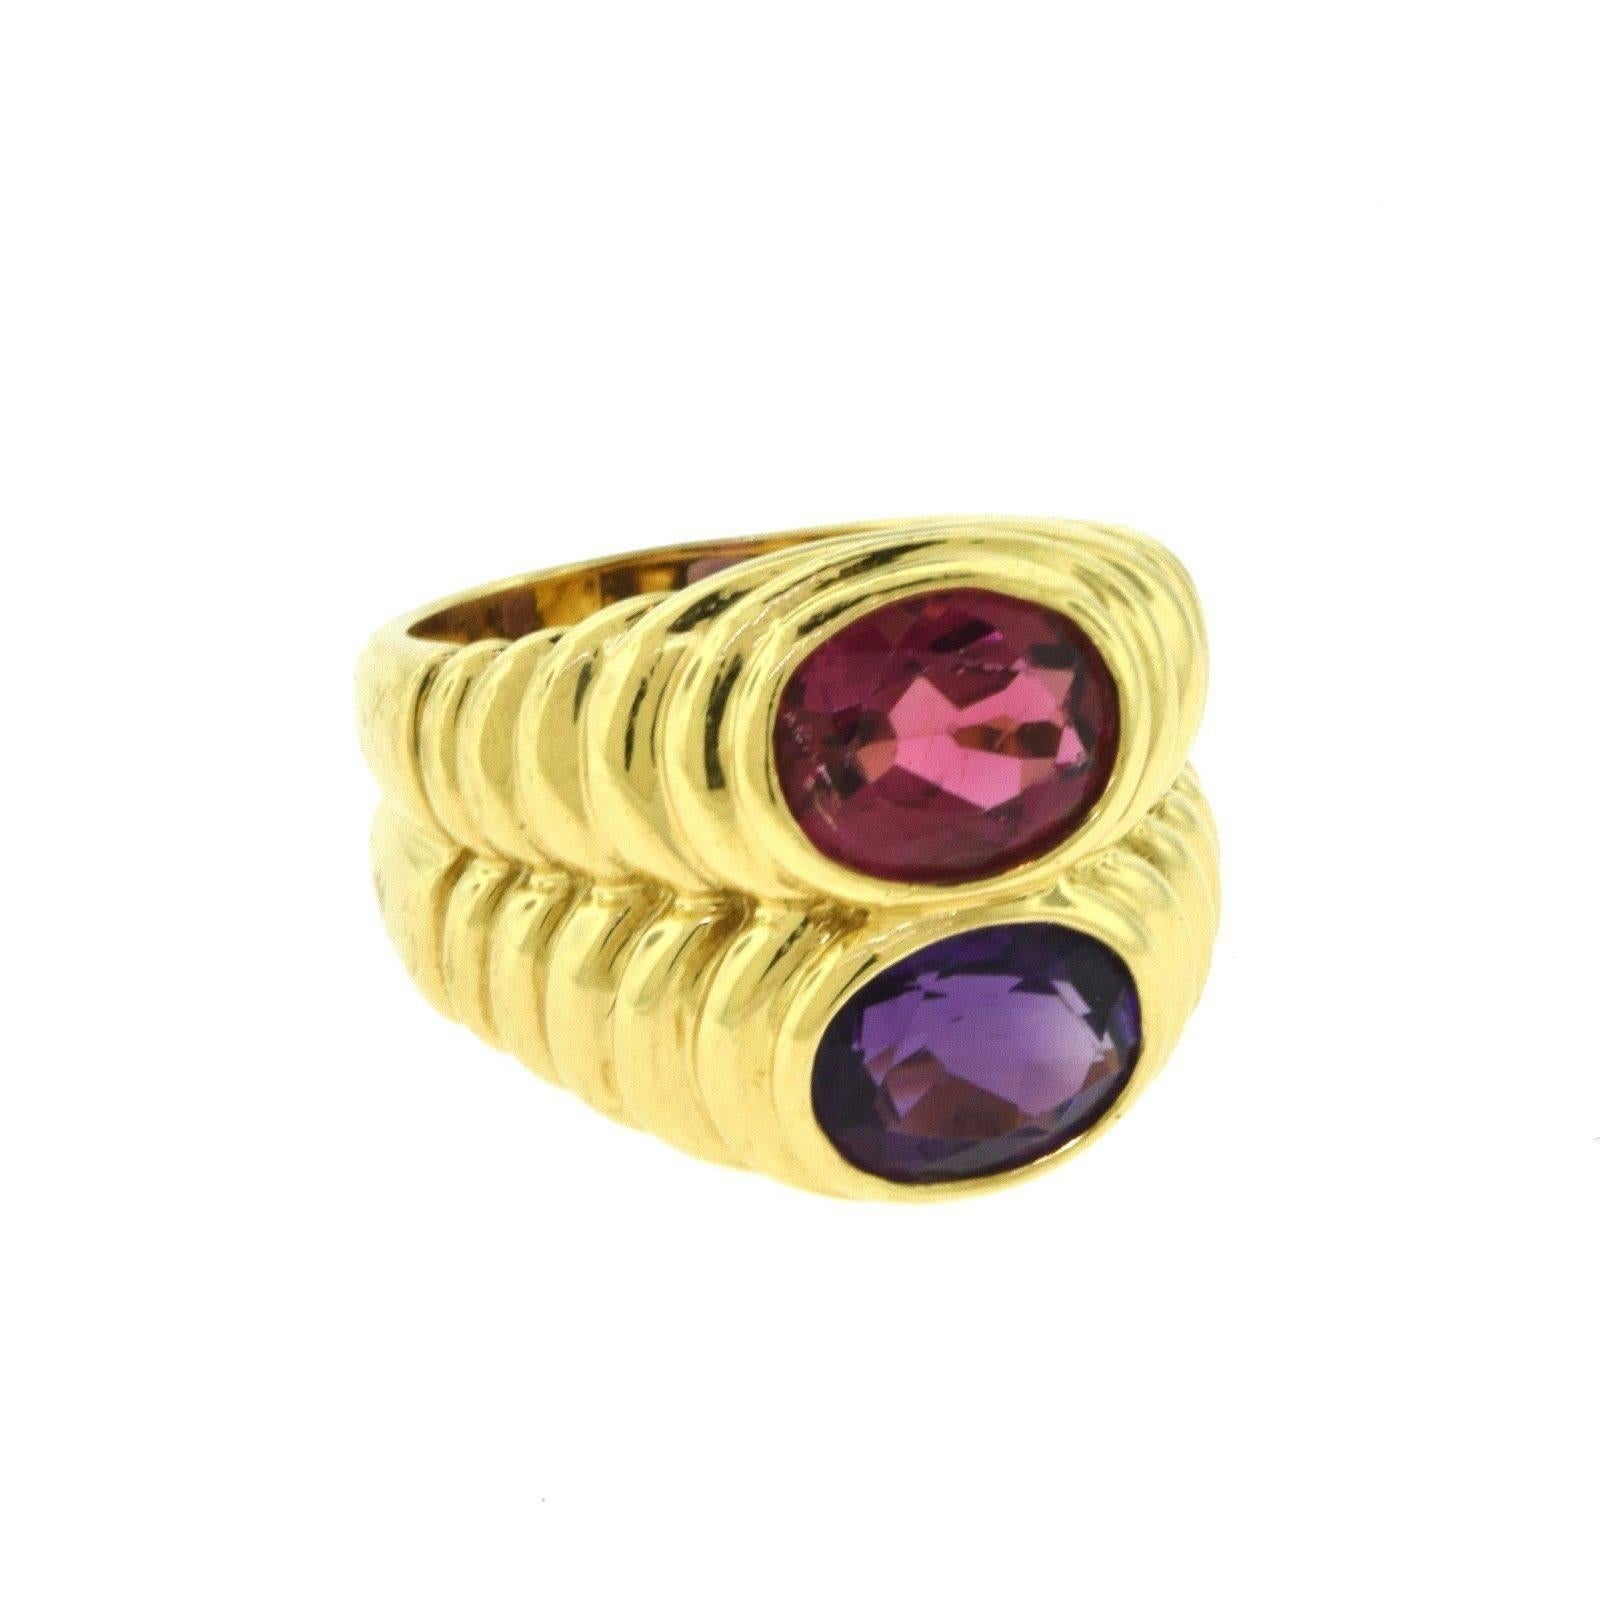 Gorgeous multi gemstone ring designed and created by BVLGARI, with an oval rubellite and an amethyst stone in 18k yellow gold. A vintage and beautiful look to go with your casual or elegant attire. Contact us for more information.

Item